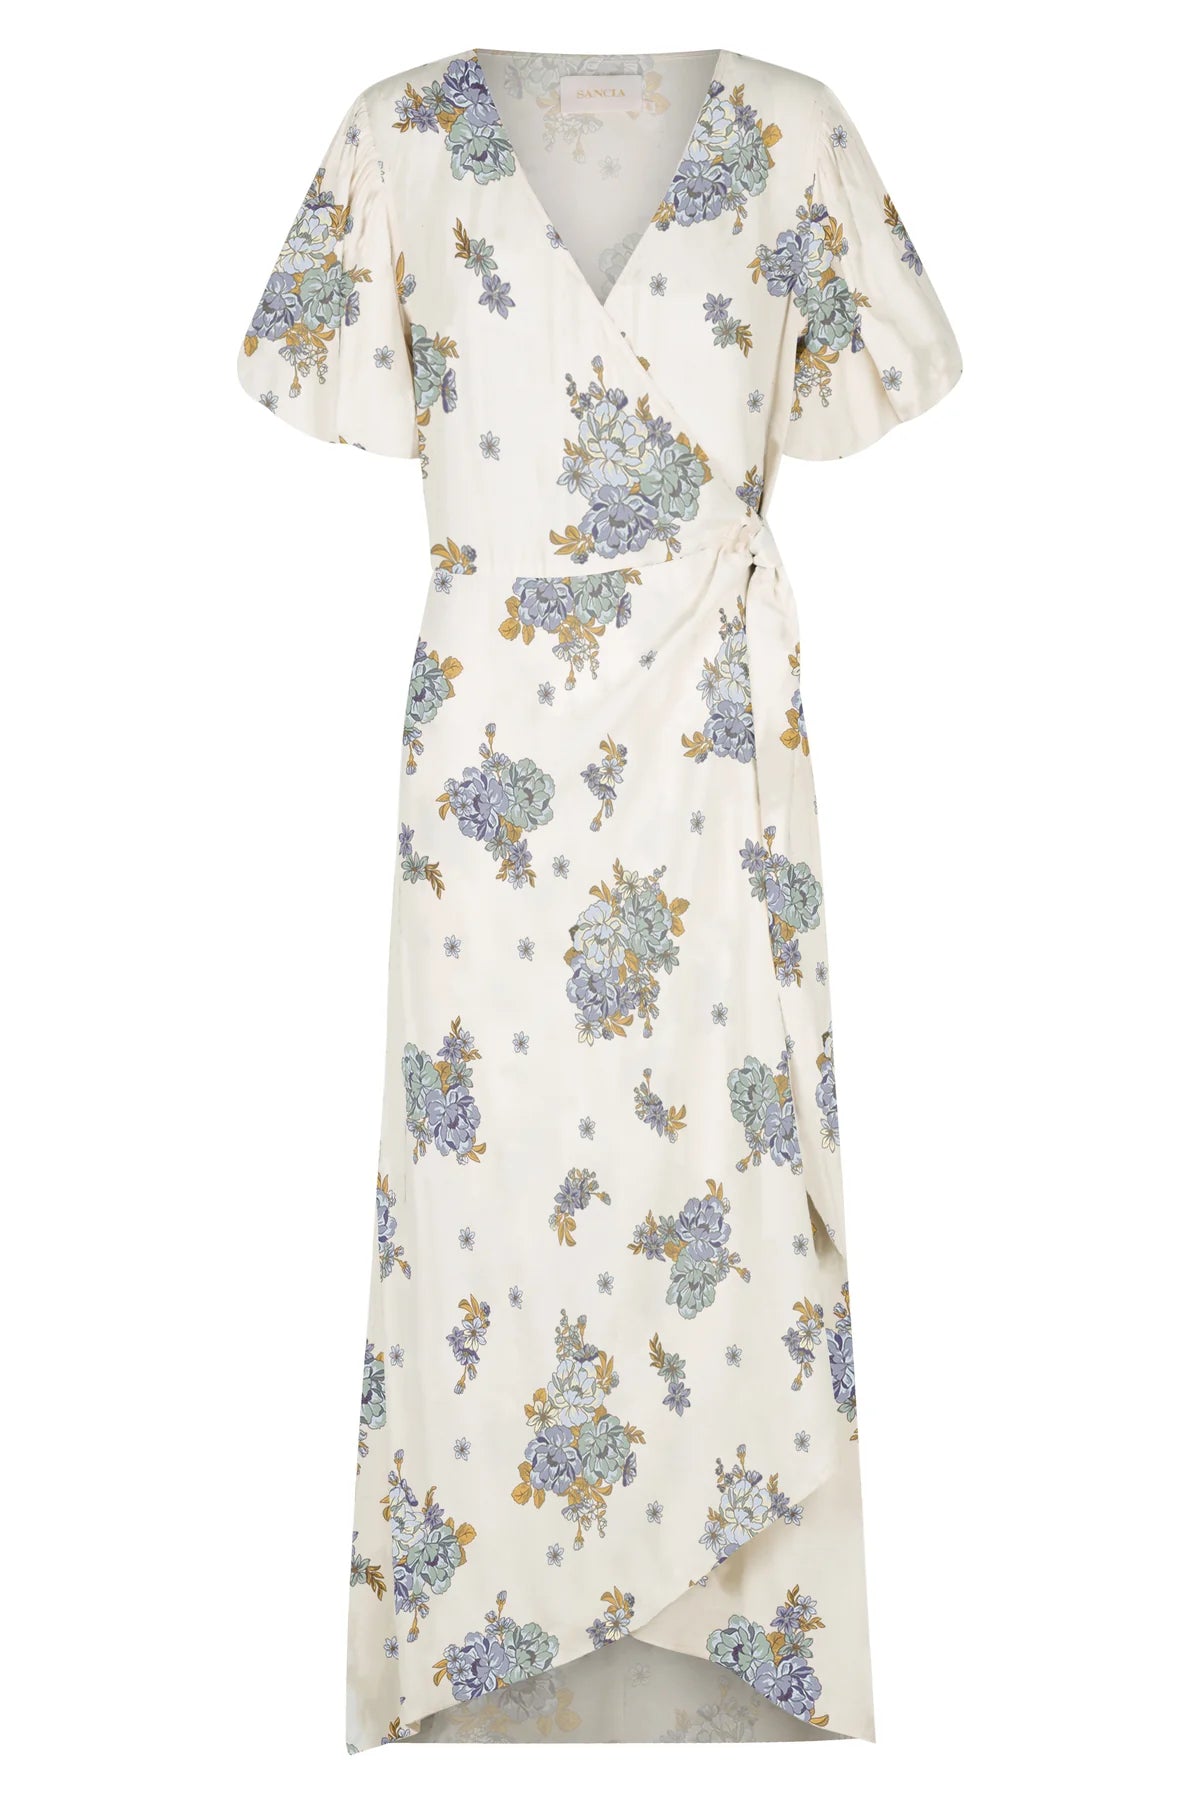 Cream V neck wrap dress with short puff sleeves and floral print